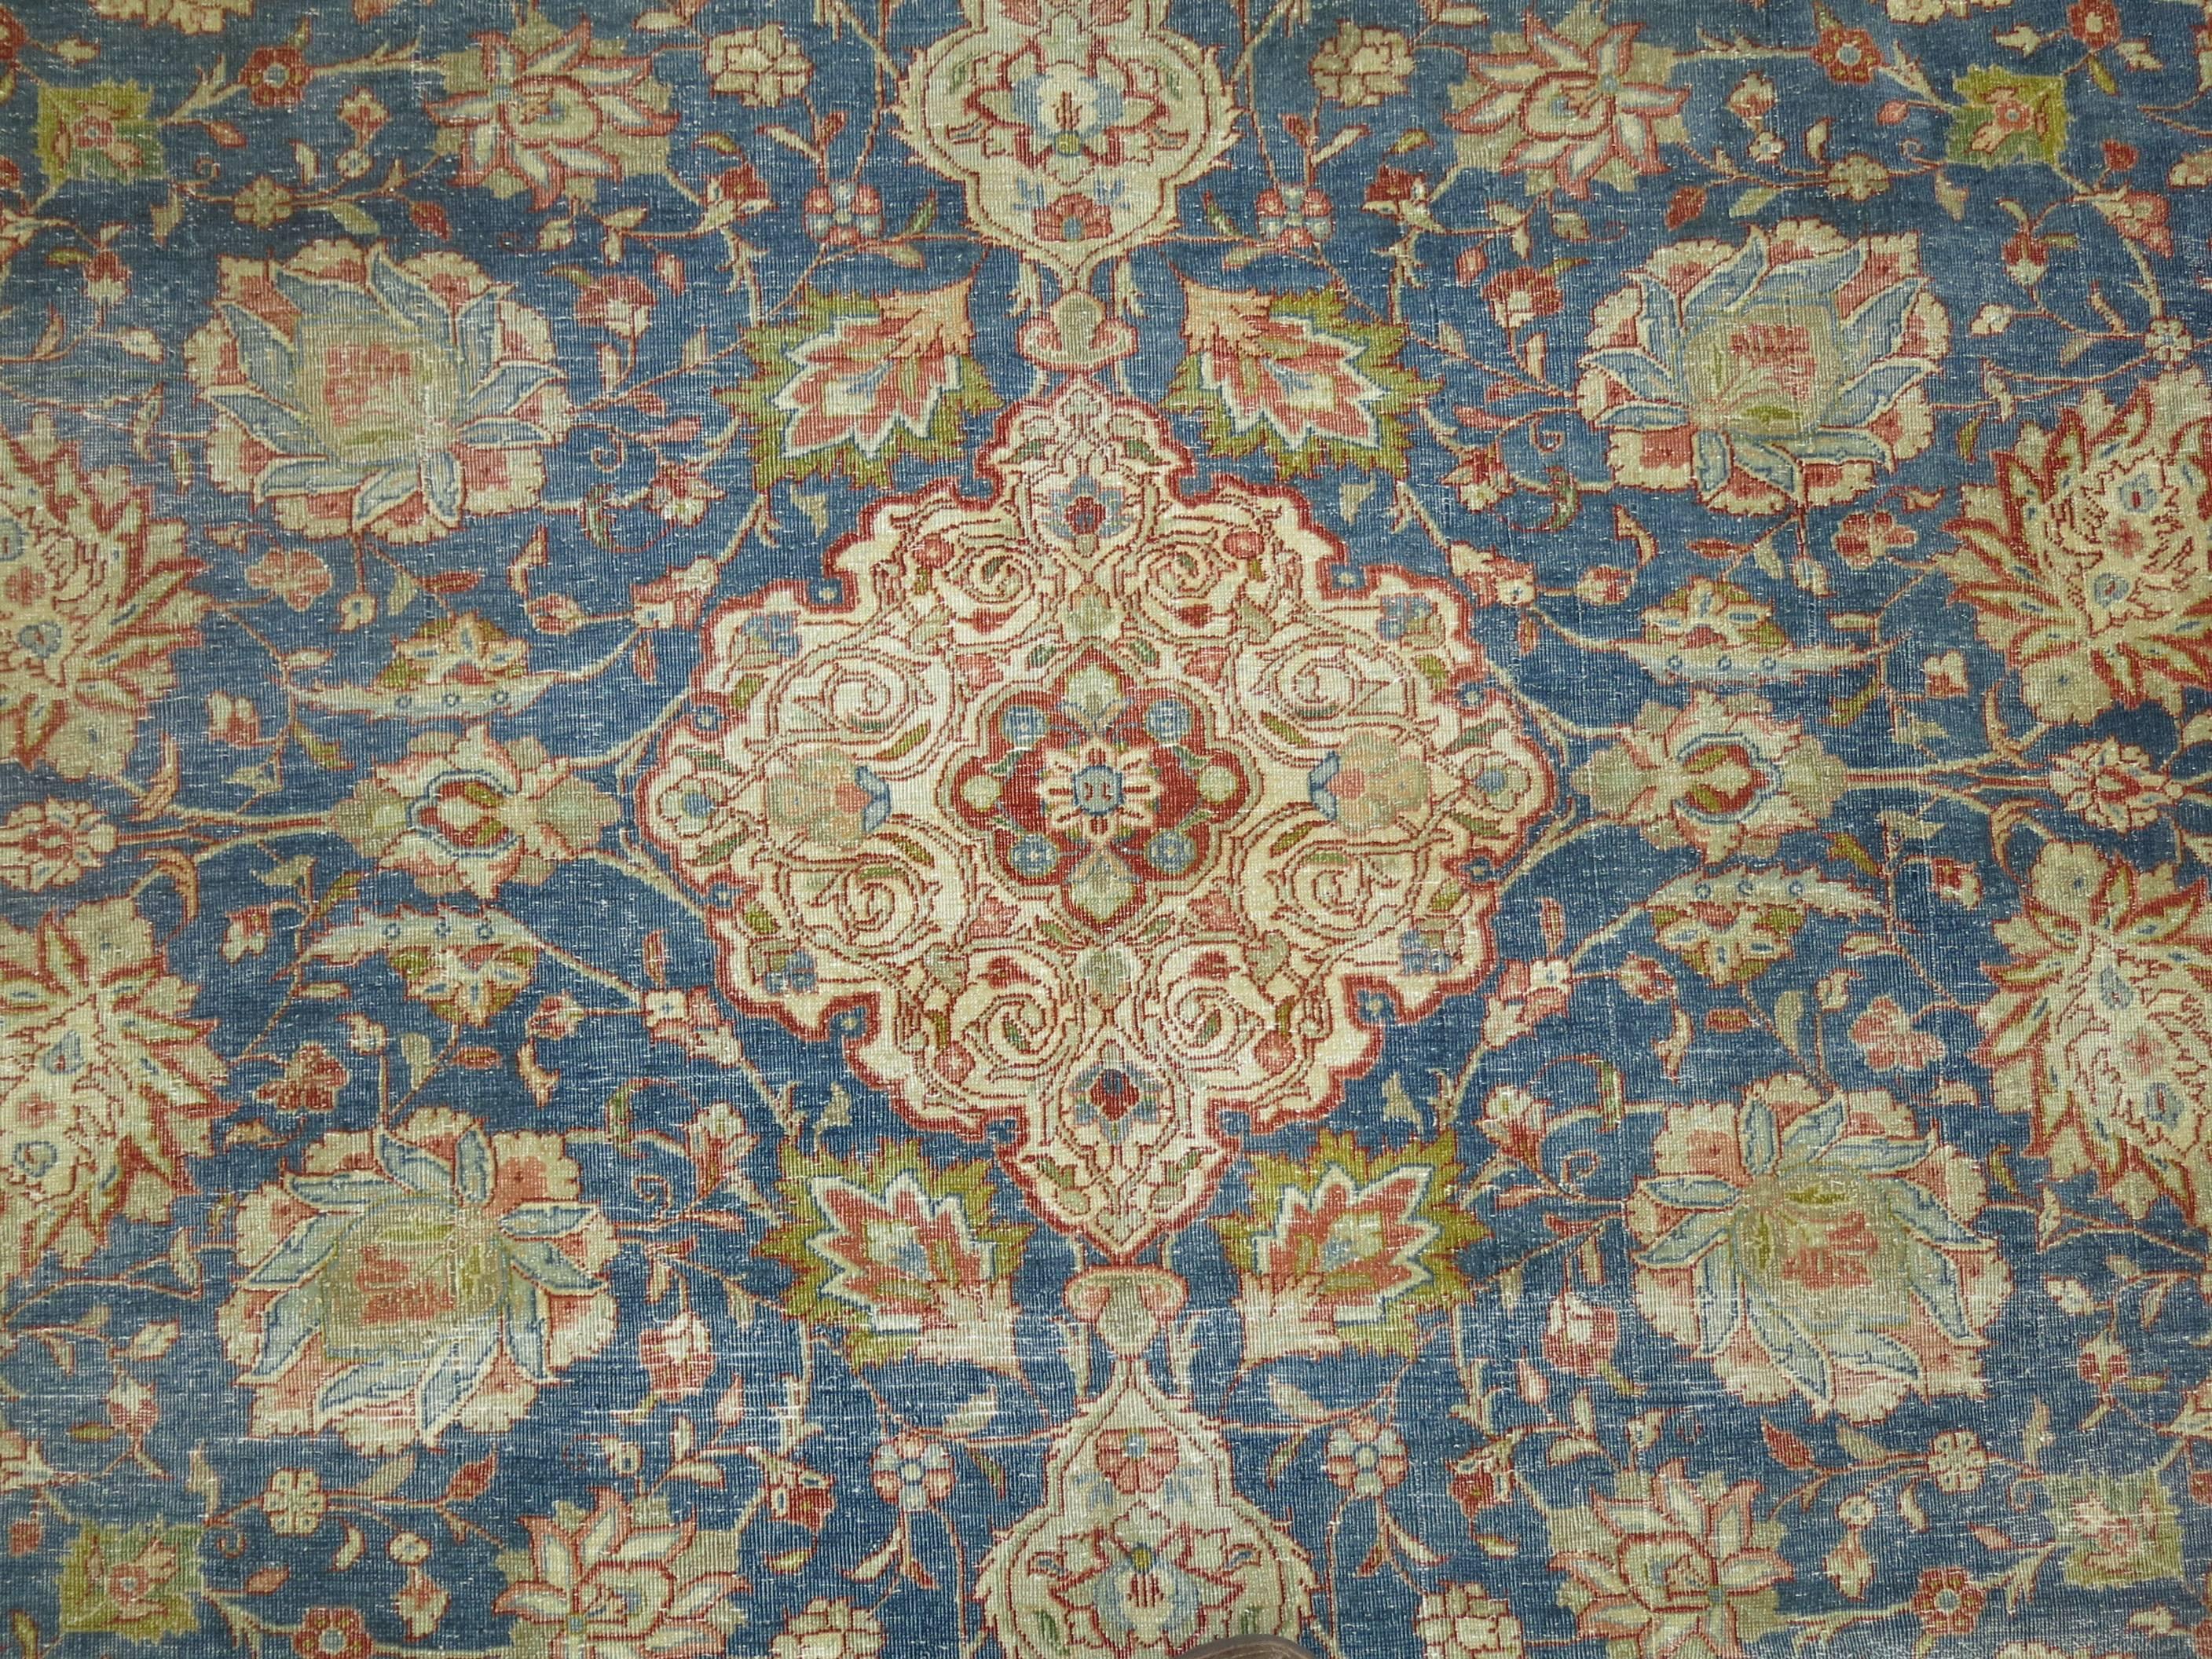 Hand-Knotted Blue Formal Traditional Antique Persian Tabriz Rug